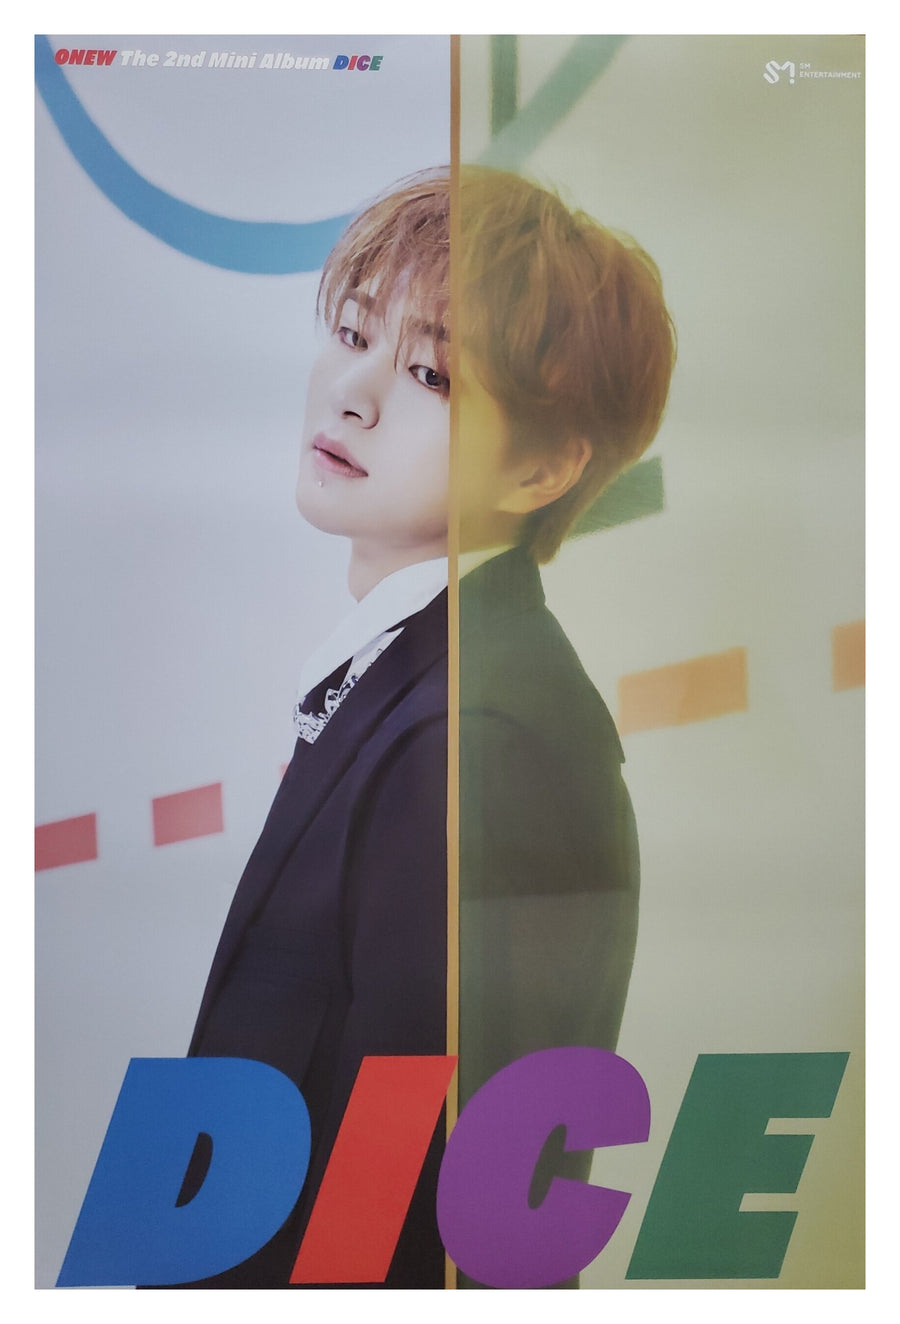 Onew 2nd Mini Album Dice (Digipack Ver.) Official Poster - Photo Concept 1